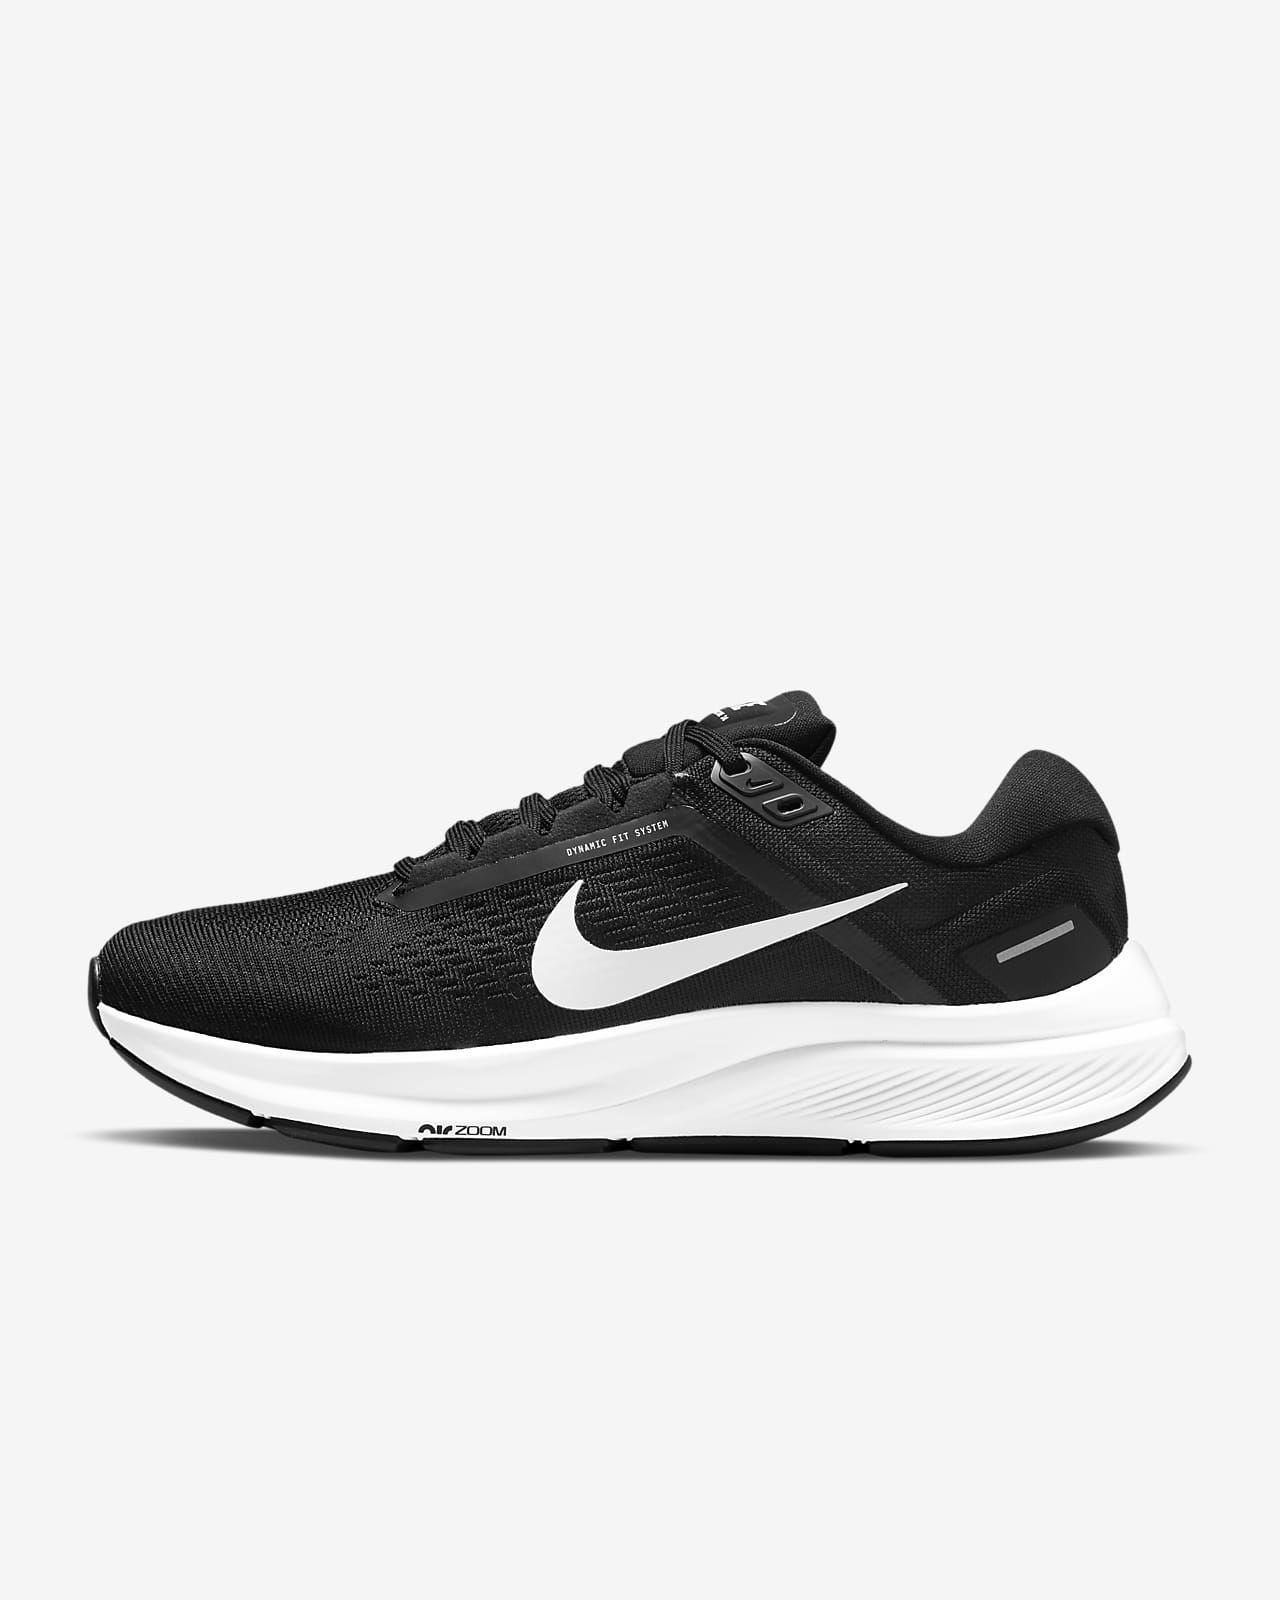 Nike Air Zoom Structure 24 Women's Road Running Shoes. Nike.com | Nike (US)